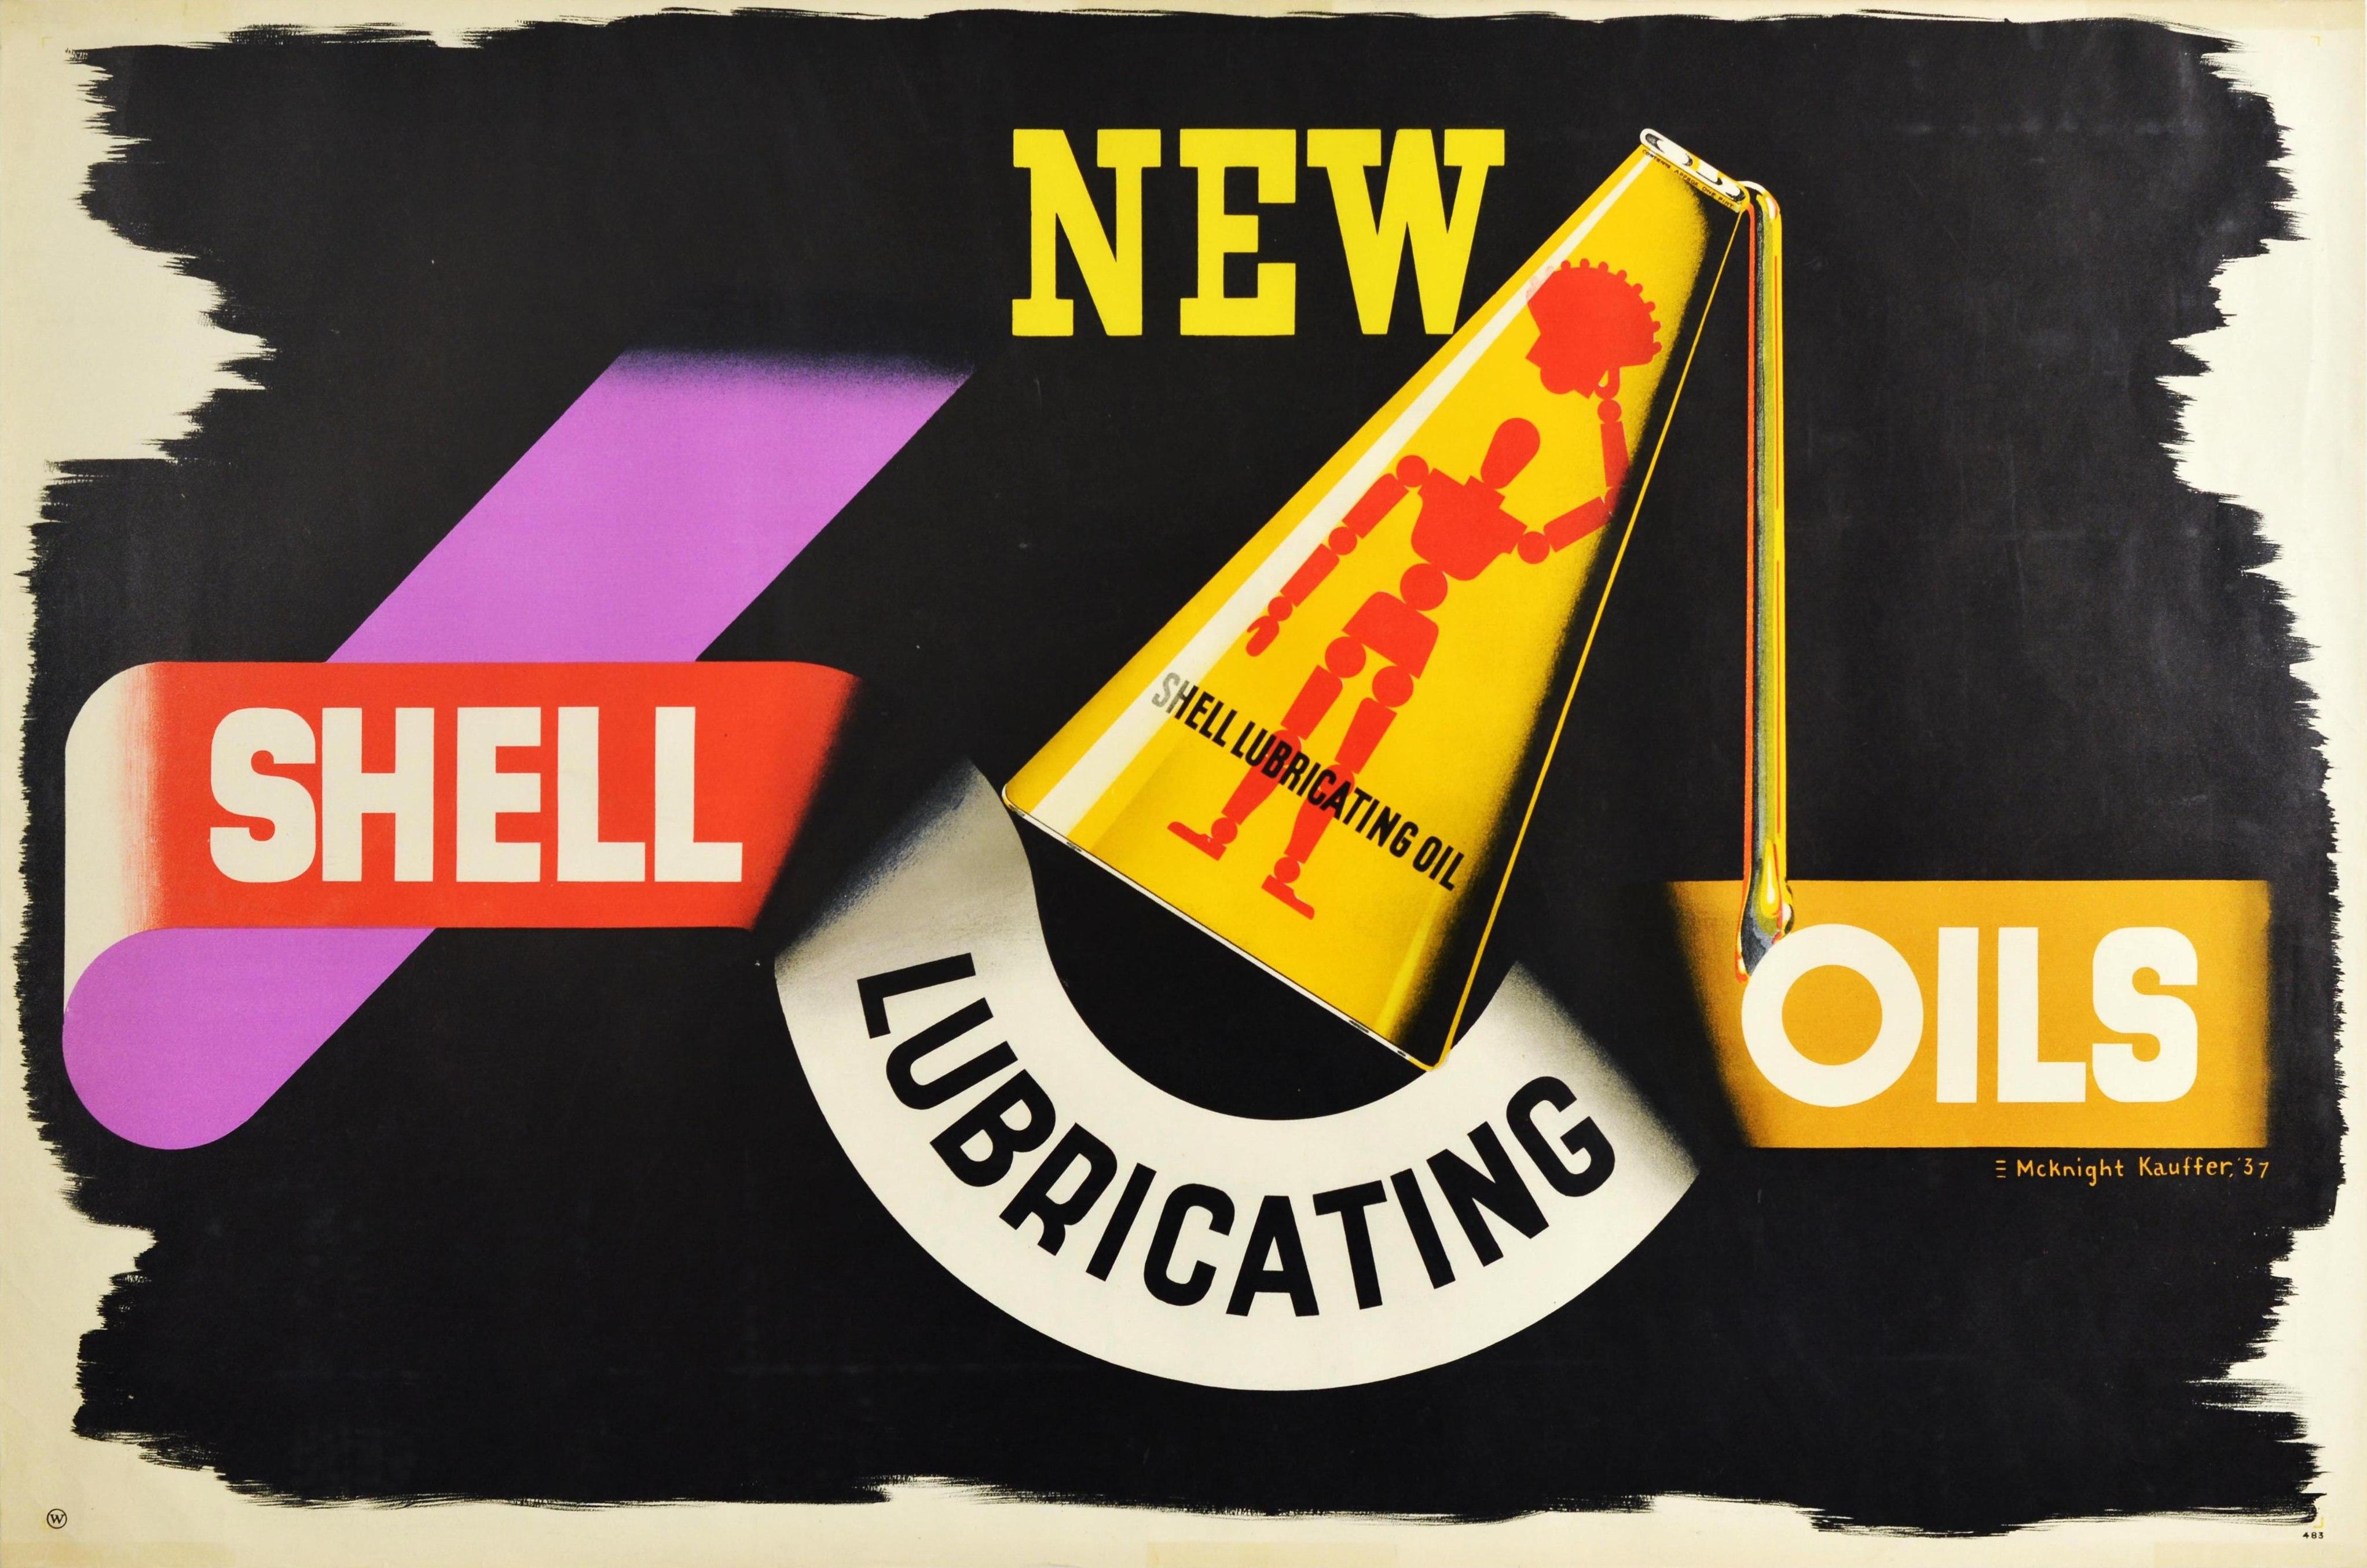 Original vintage advertising poster for shell Lubricating oils designed one of the most renowned poster artists of the 20th century Edward McKnight Kauffer (1890-1954). The eye-catching design shows a yellow can of Shell motor oil featuring a